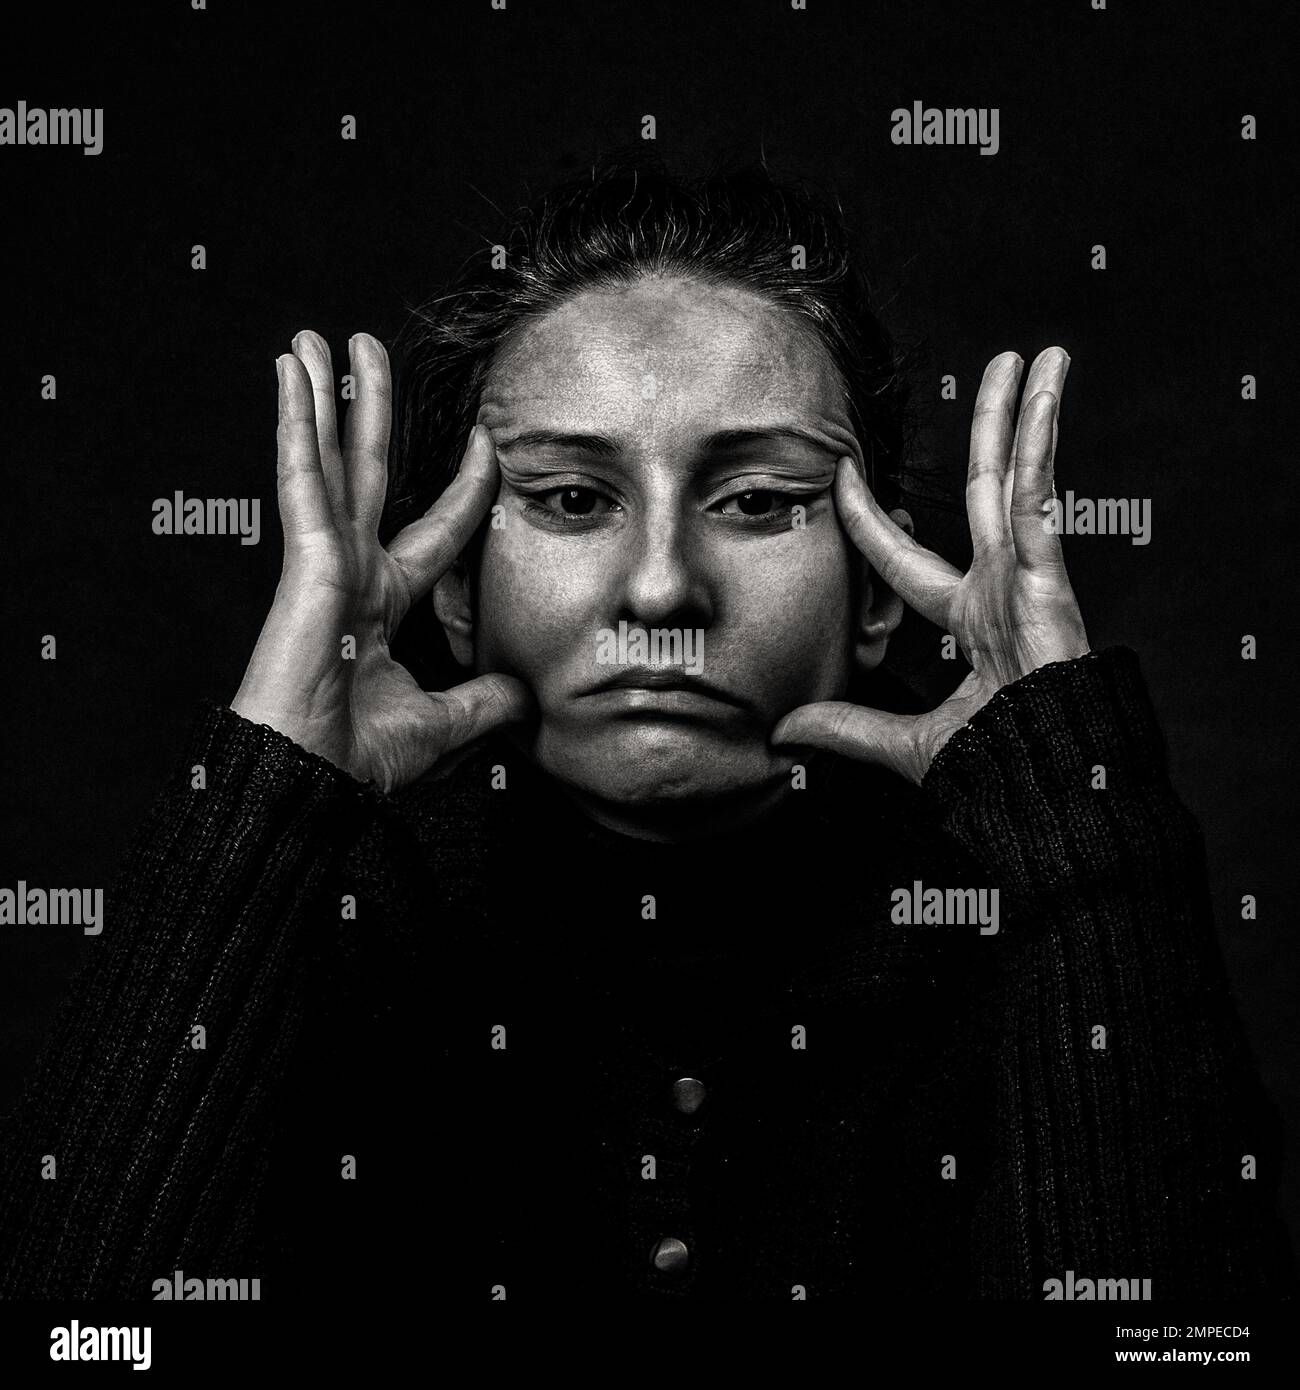 Conceptual dark portrait of woman stretching the skin of her face in ugly grimace.  Problems with skin and wrinkles, demonstration against plastic sur Stock Photo